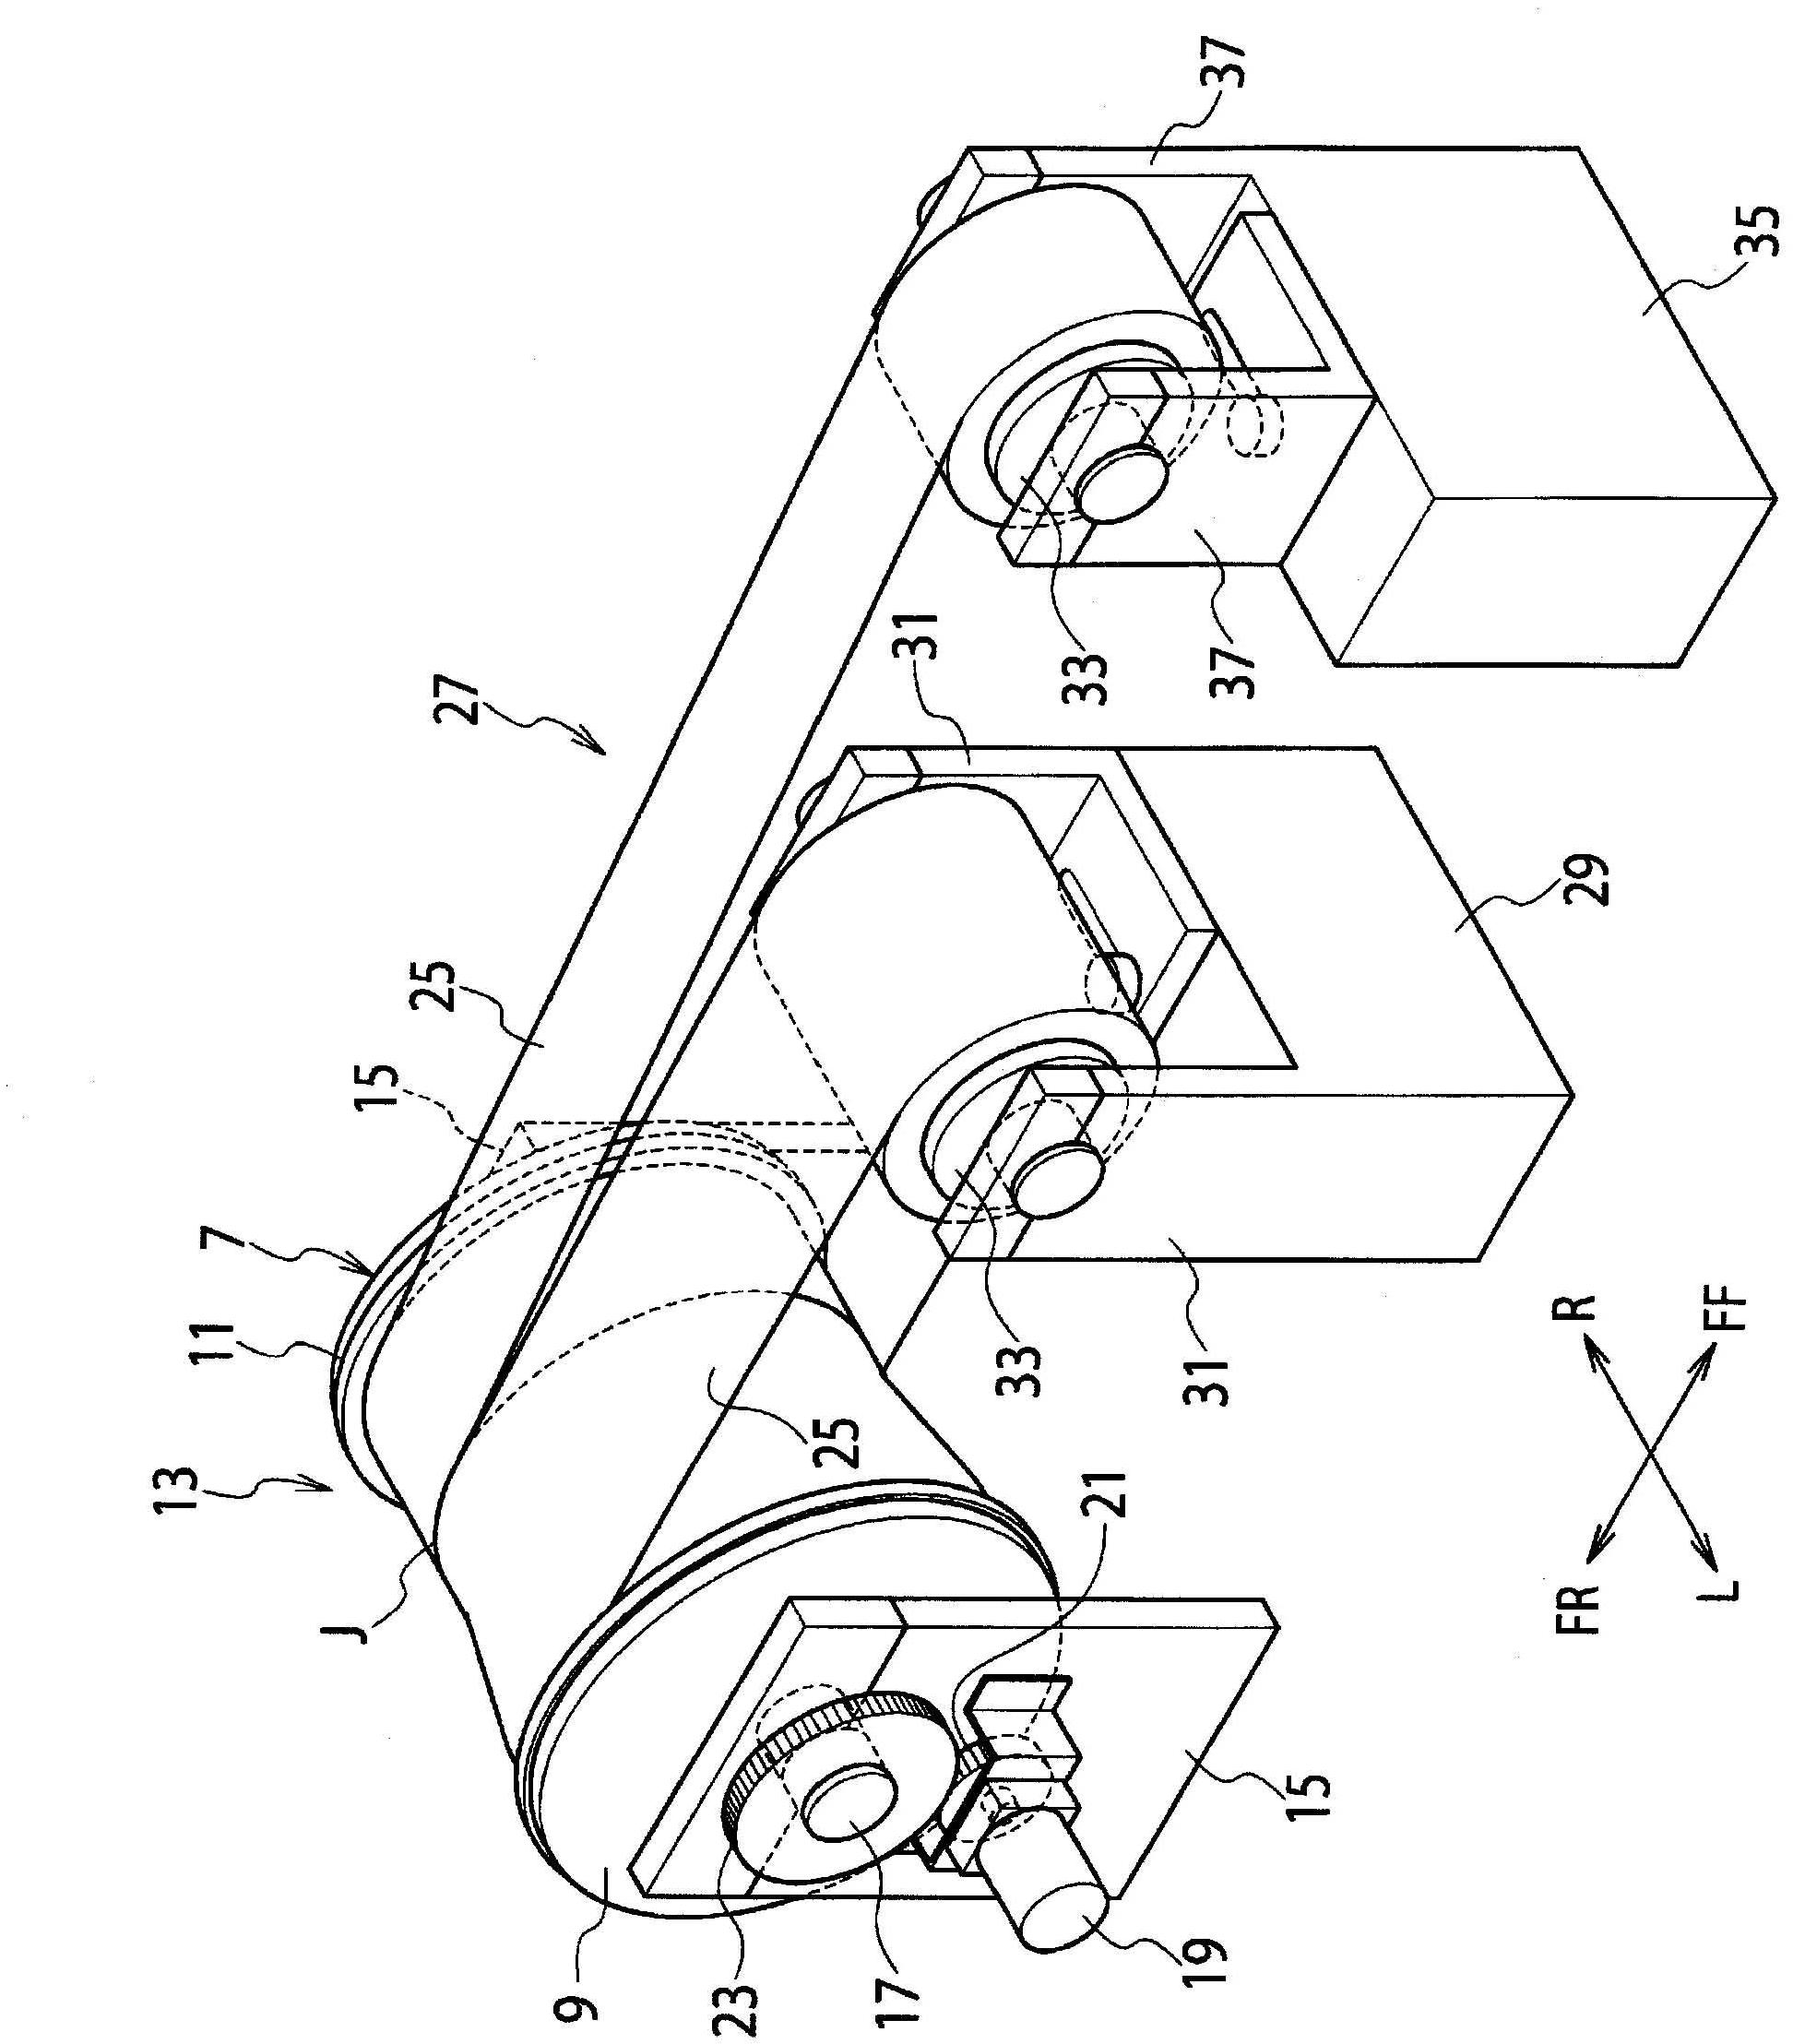 Cylindrical structure and method of production thereof